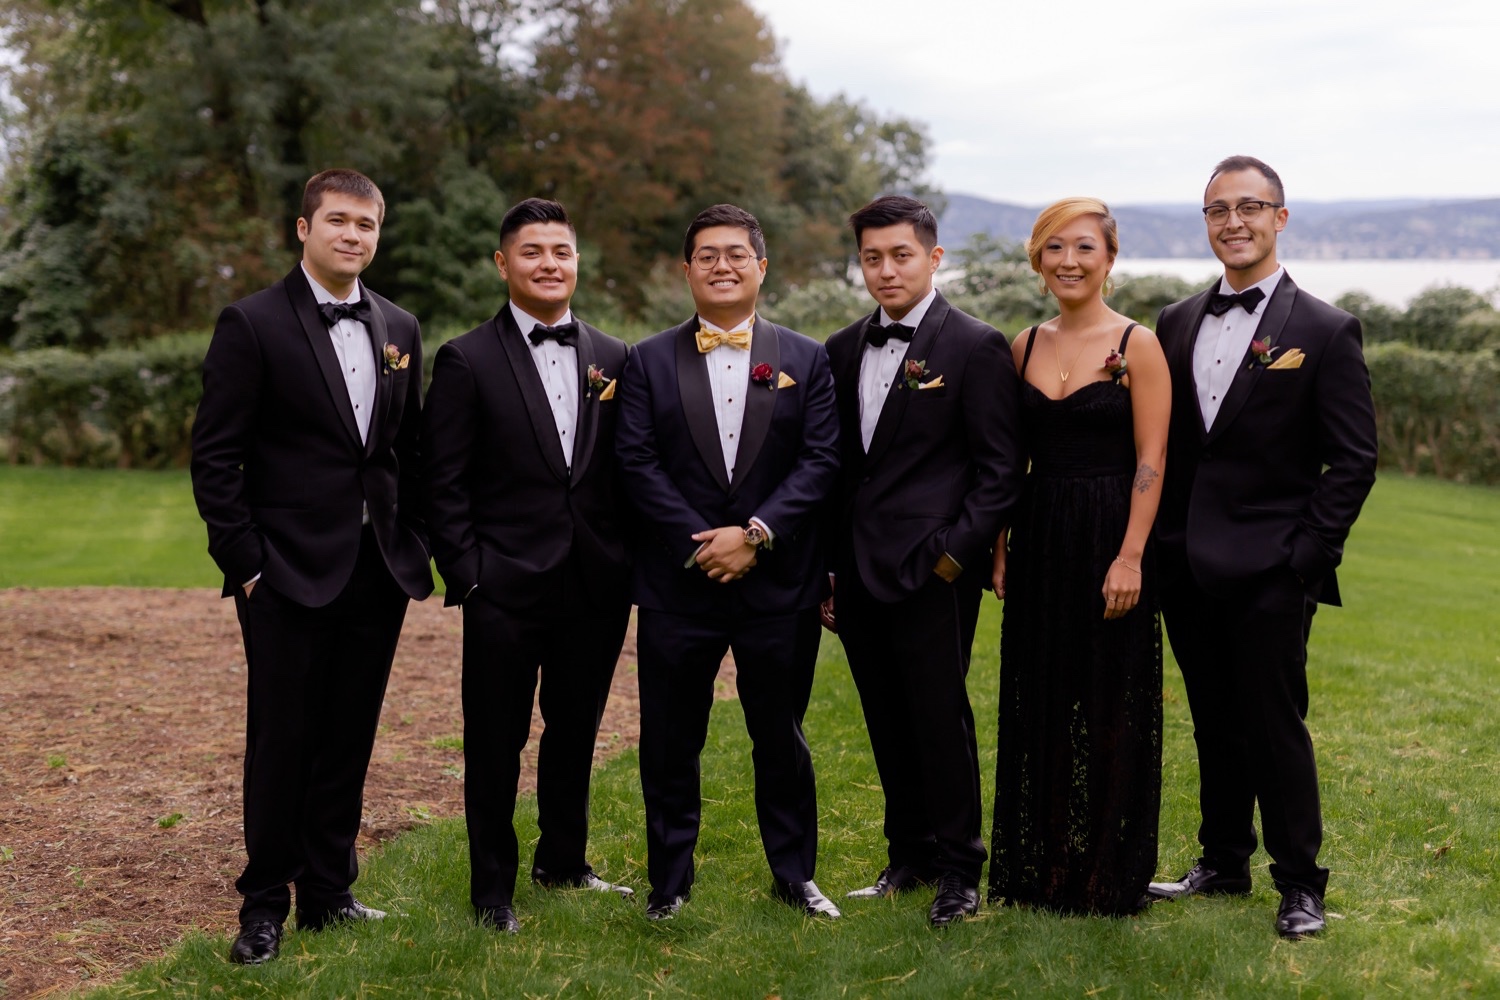 A groom and his groomsmen posing for a picture at the Tappan Hill Mansion.